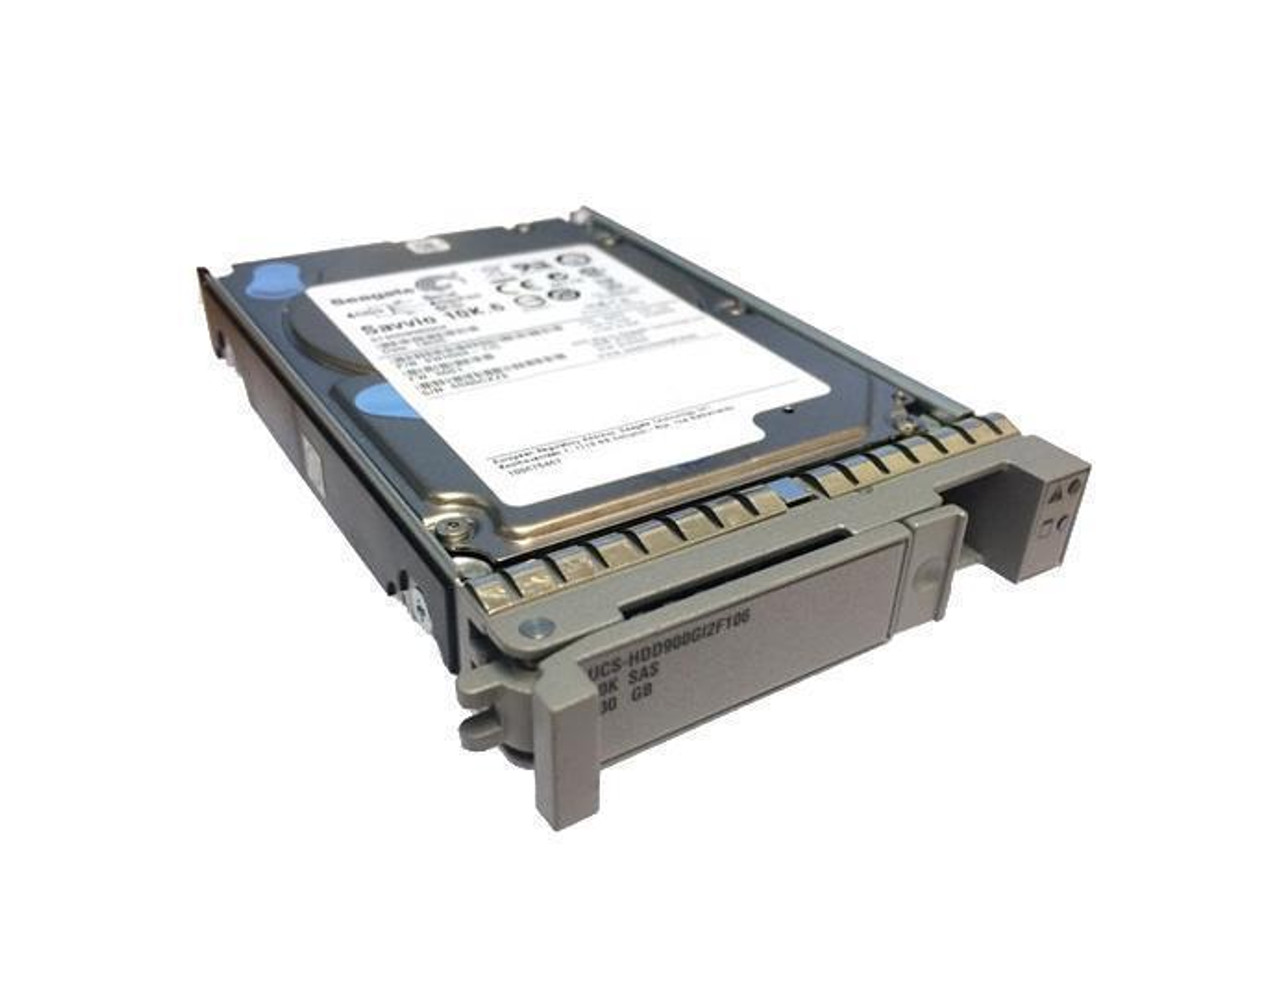 UCS-S3260-G3SD160 Cisco 1.6TB SATA 6Gbps 2.5-inch Internal Solid State Drive (SSD) for UCS S3260